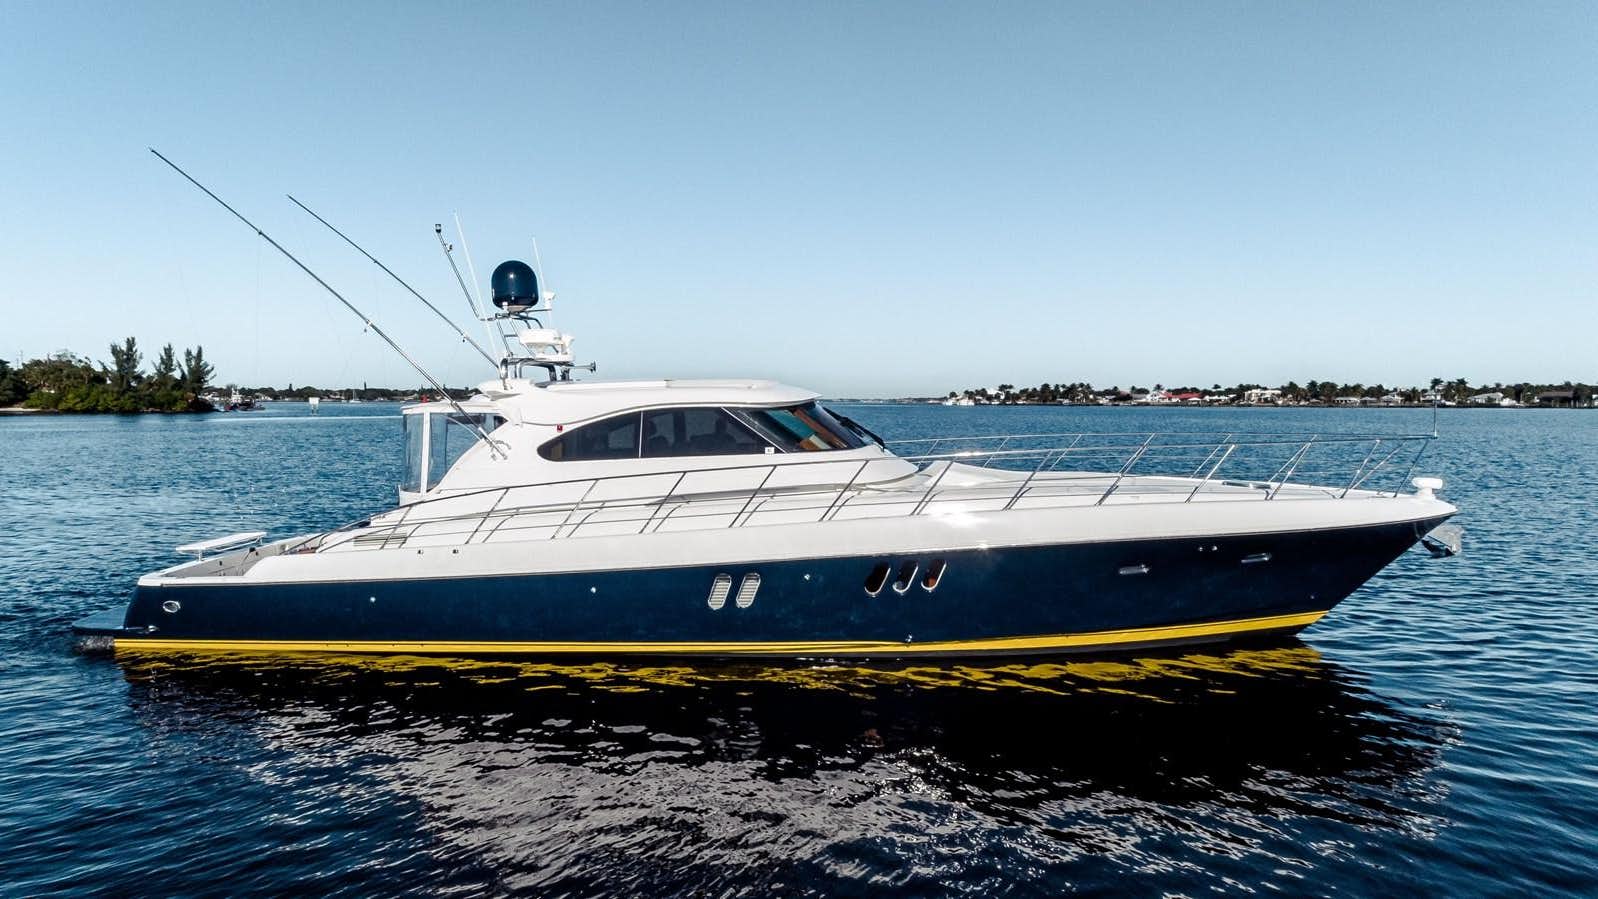 a boat on the water aboard DAY BY DAY Yacht for Sale